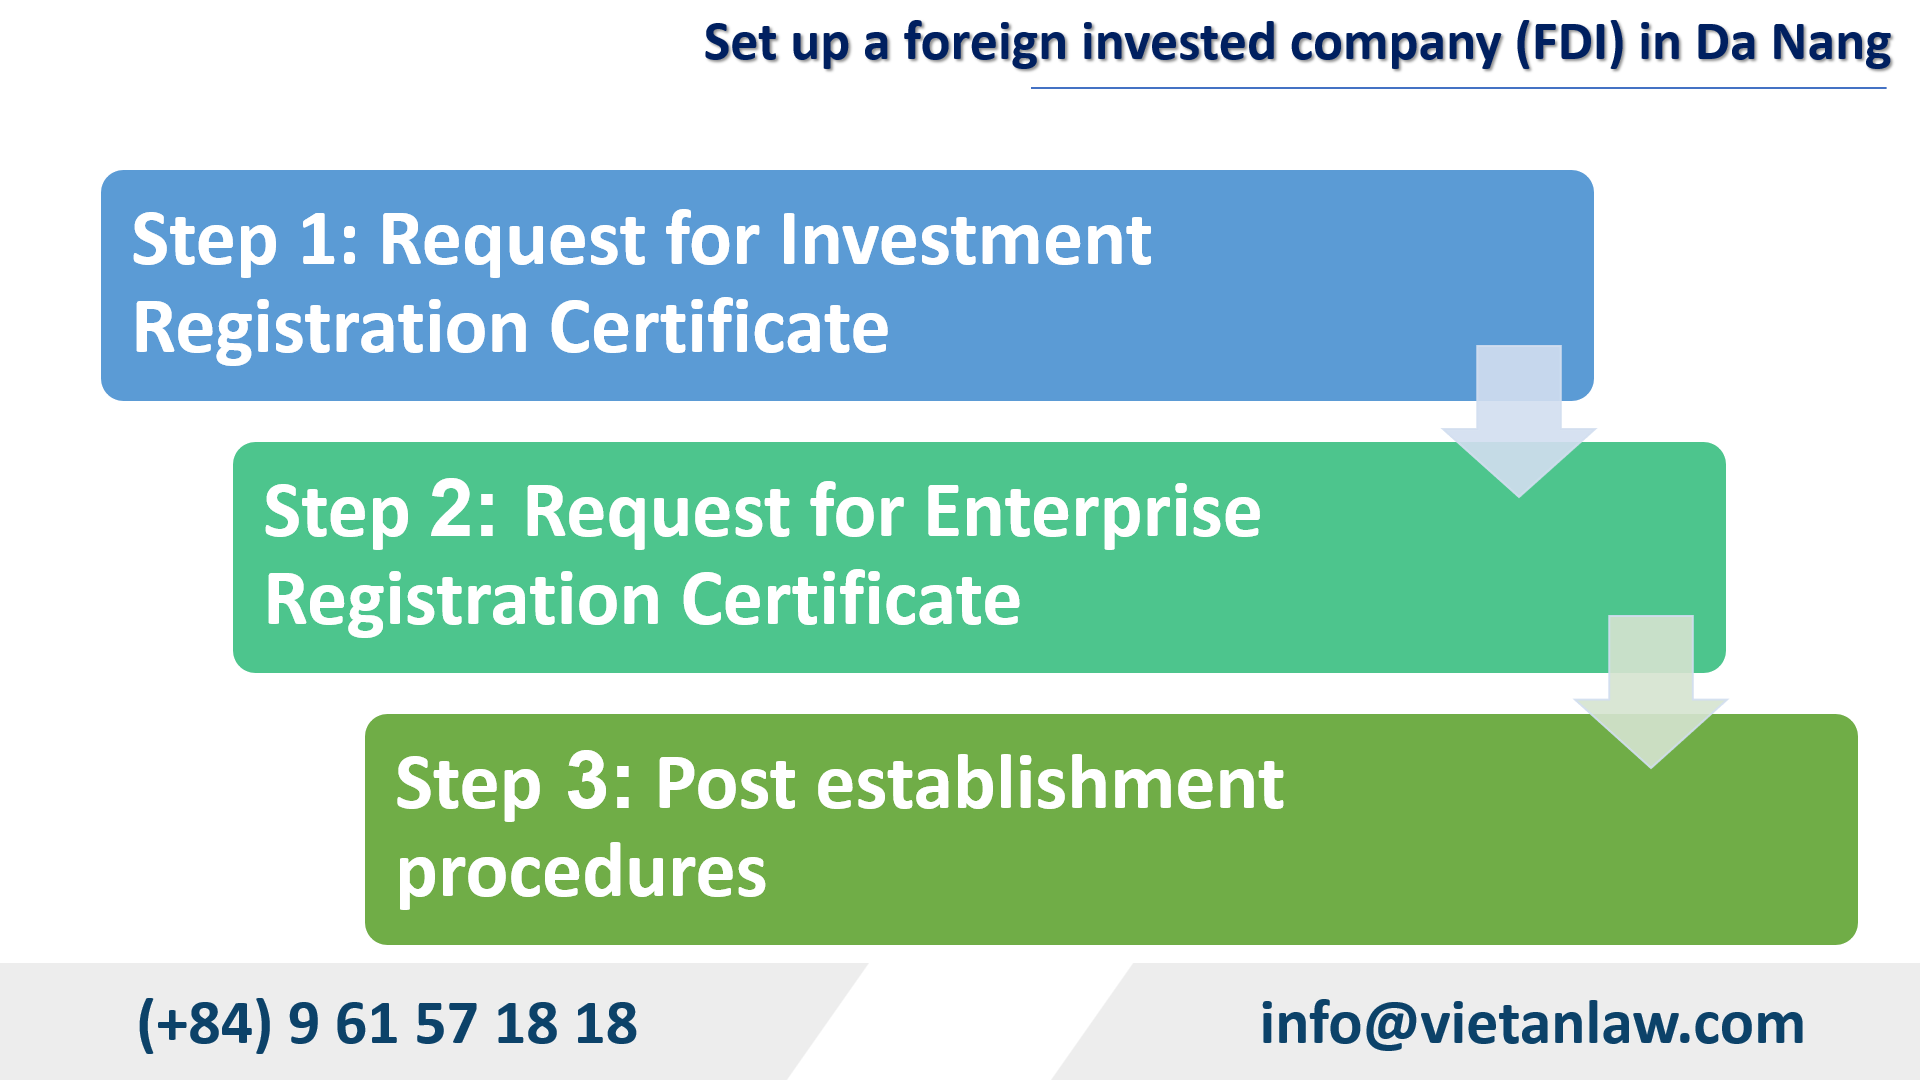 Set up a foreign invested company (FDI) in Da Nang